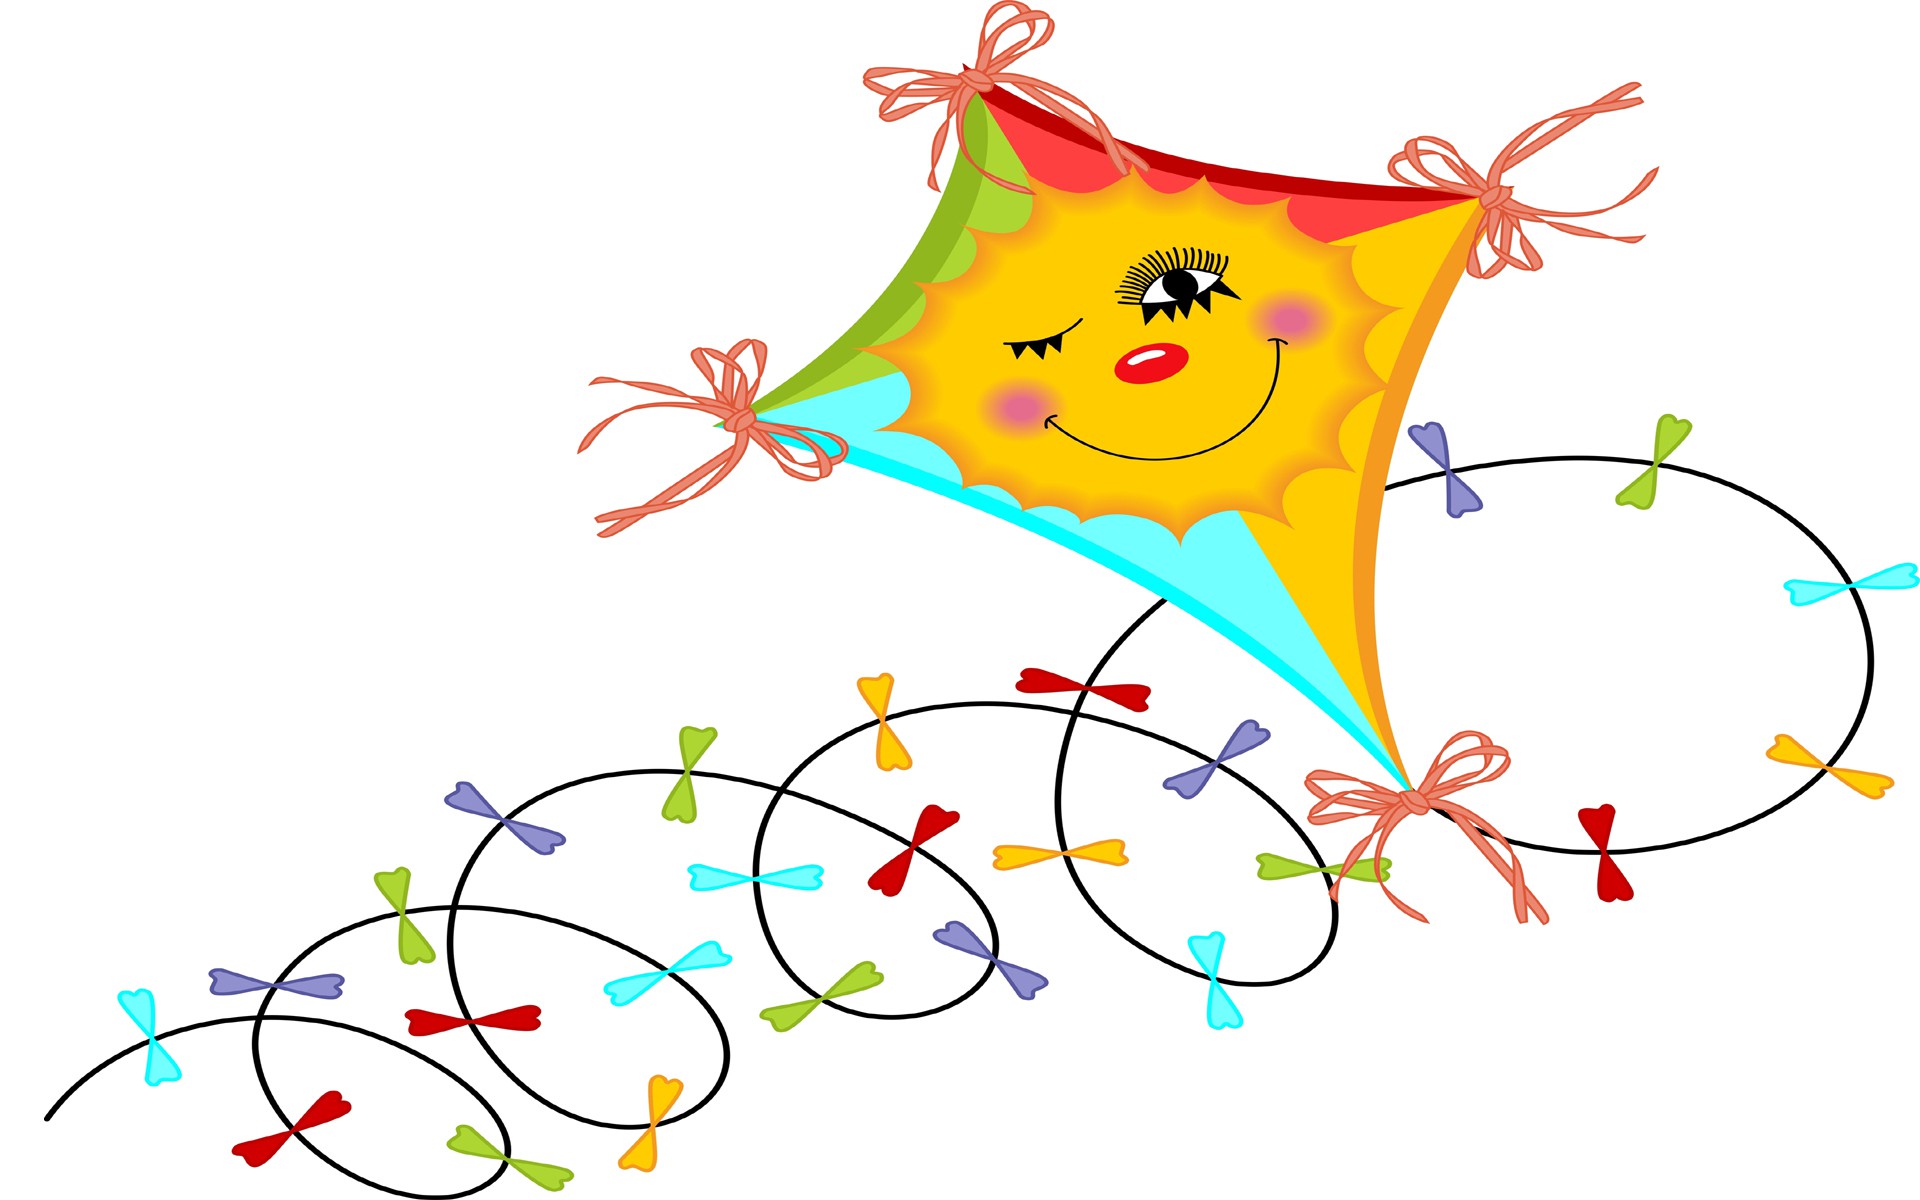 Happy Kite Flying Day Funny Kites Free Awesome Image For Mobile